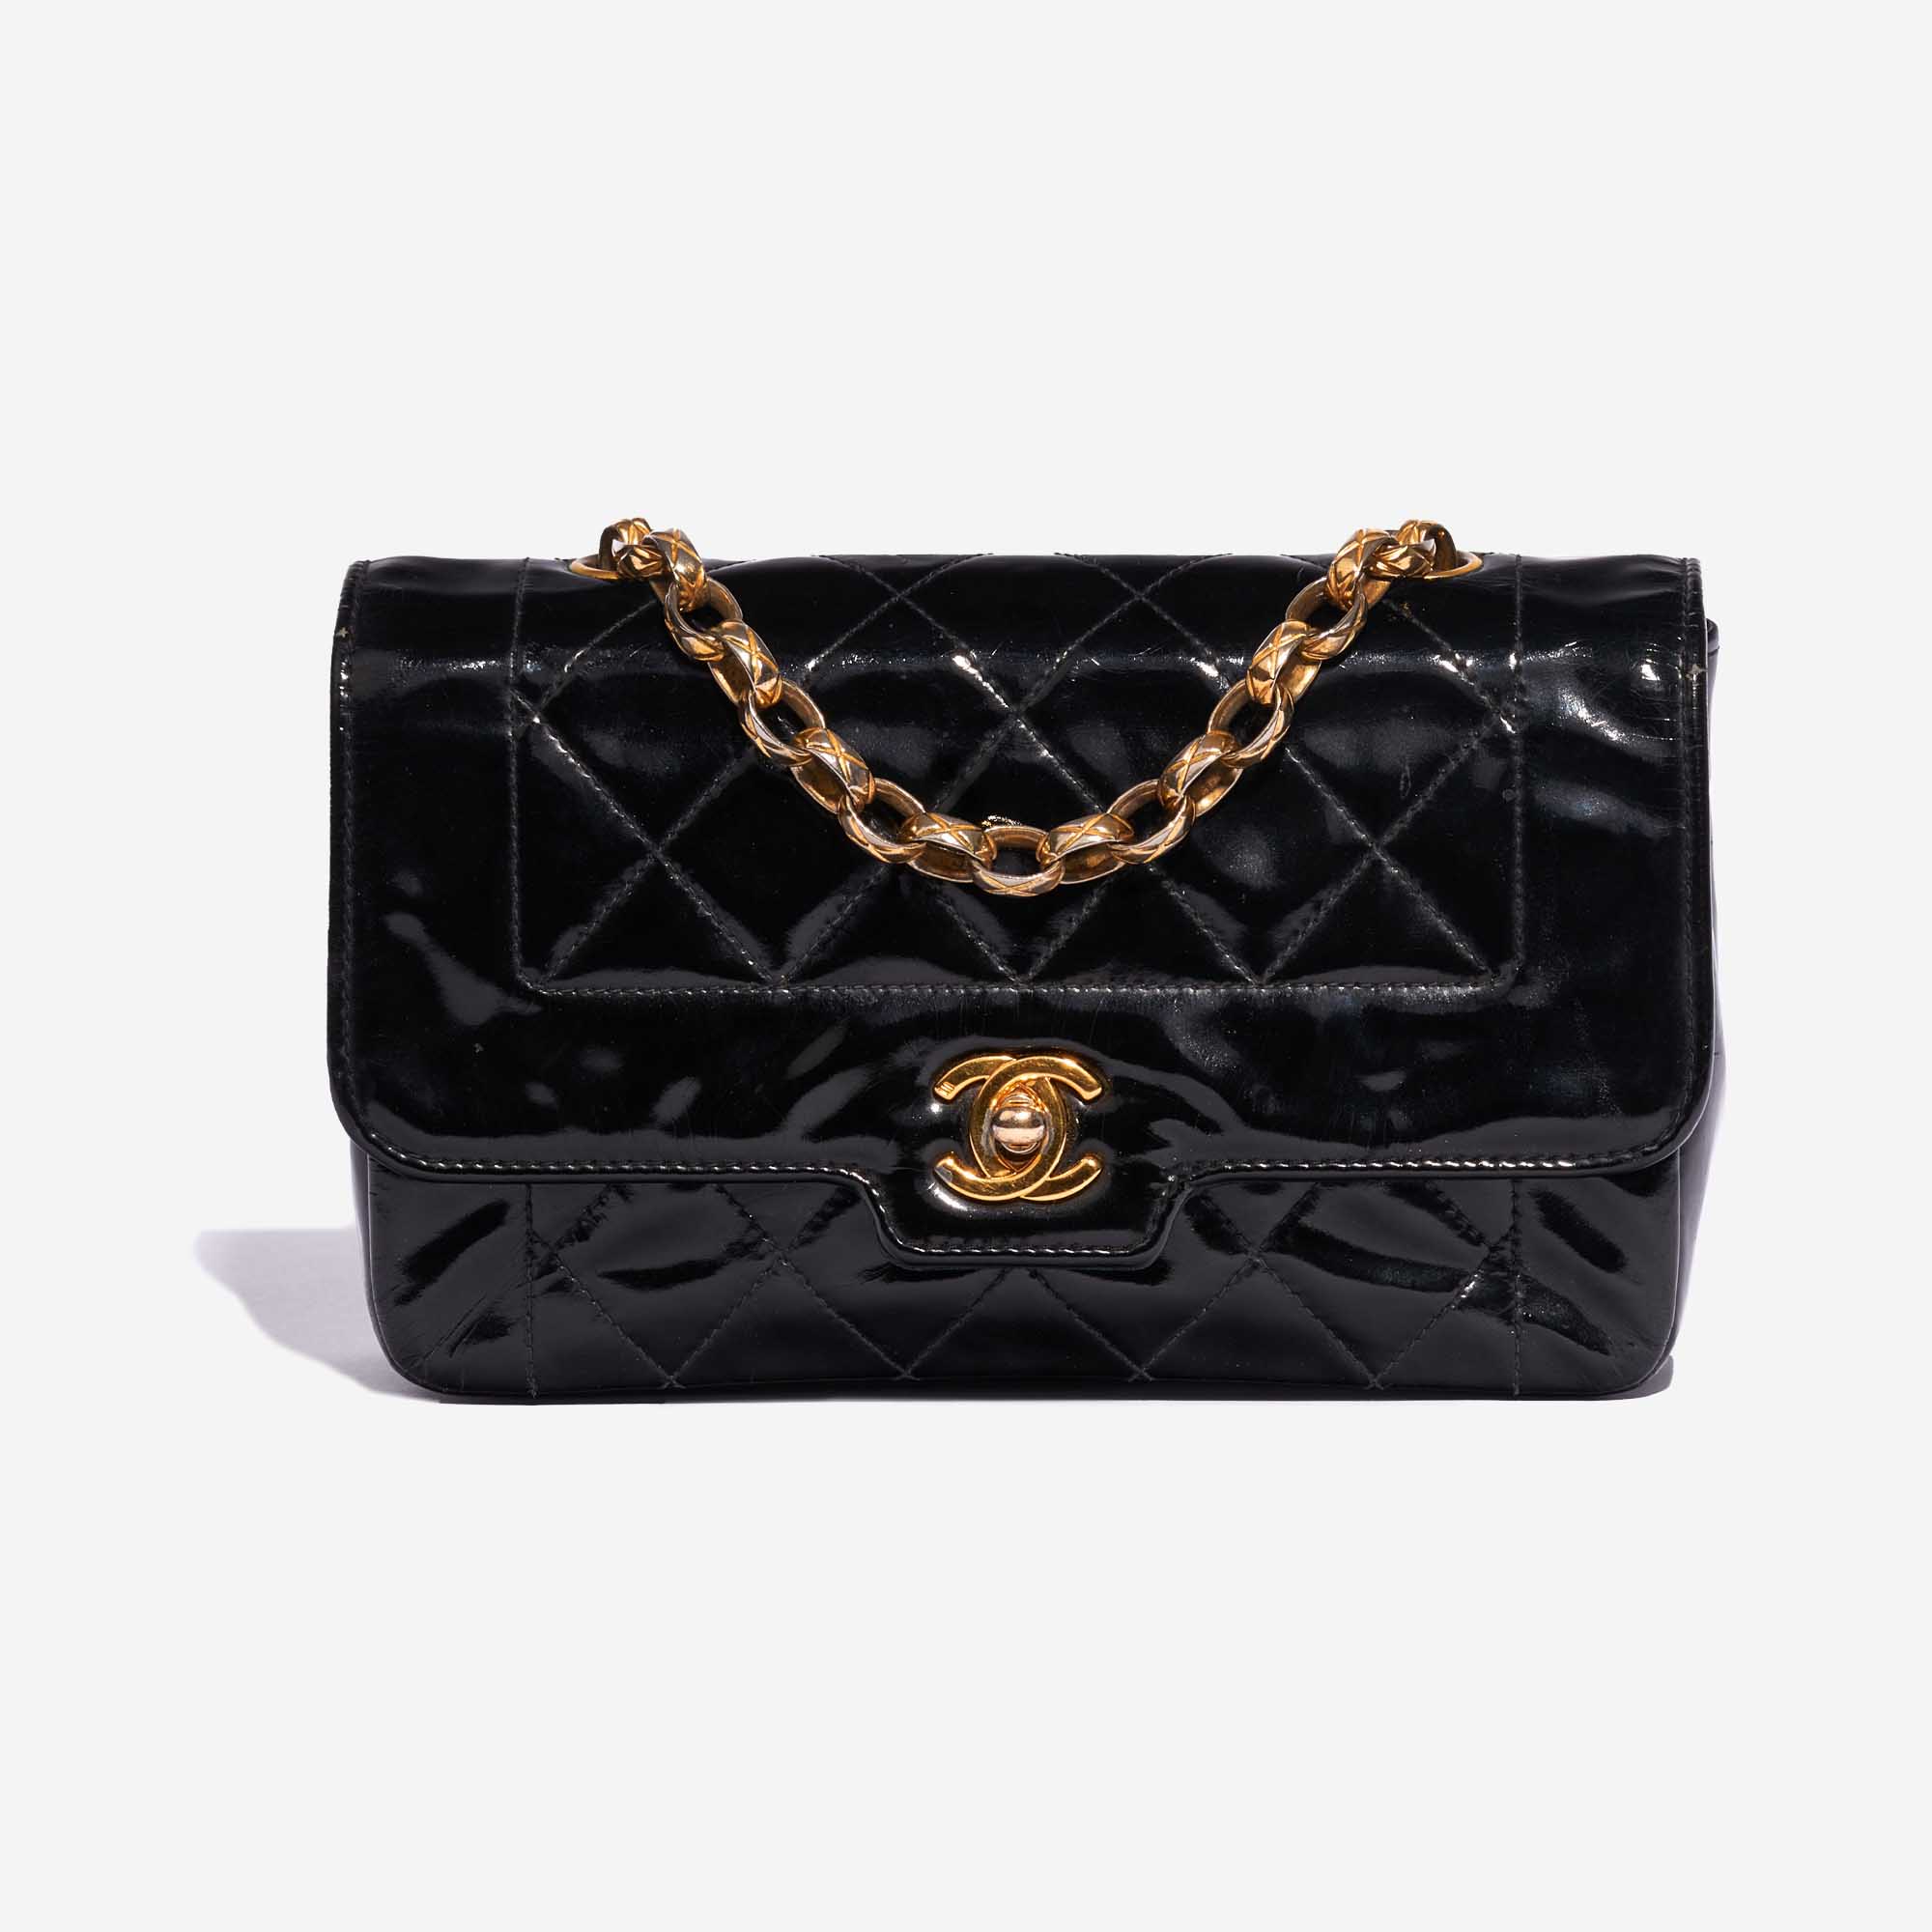 Chanel - Authenticated Diana Handbag - Patent Leather Black Plain for Women, Very Good Condition